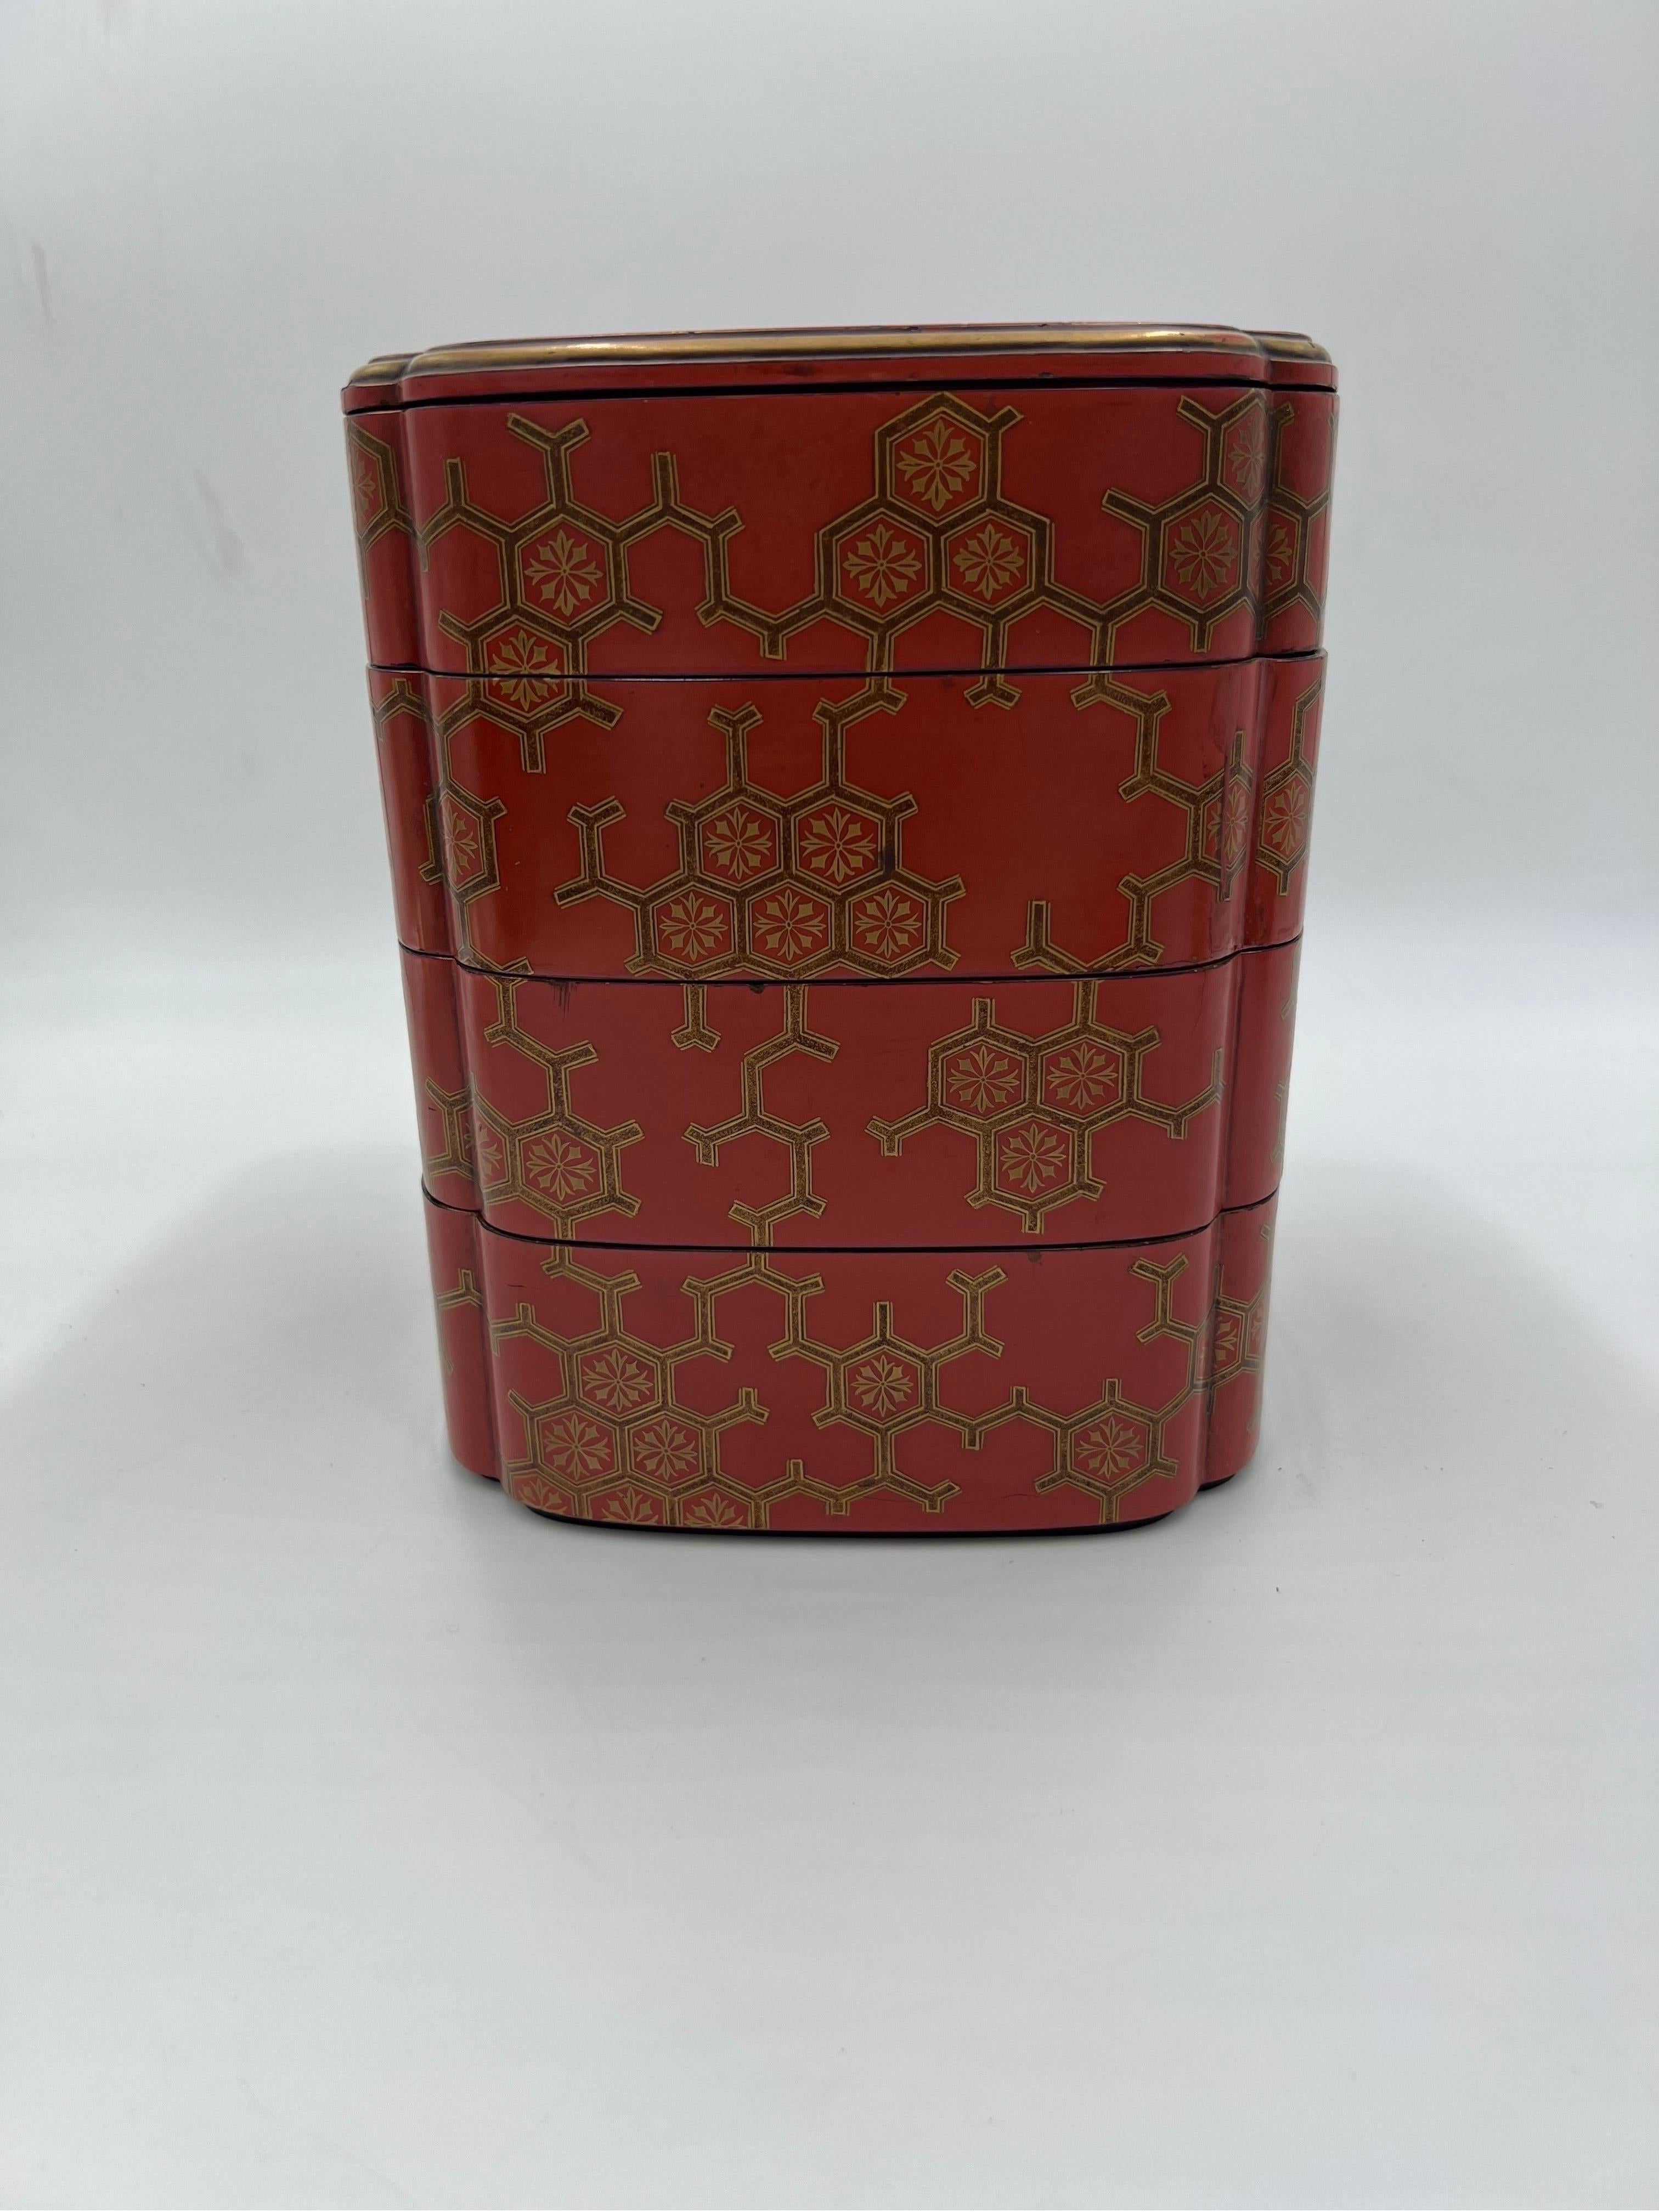 Antique Japanese Jubako 4-Tiered Bento Red Lacquerware Box For Sale 3